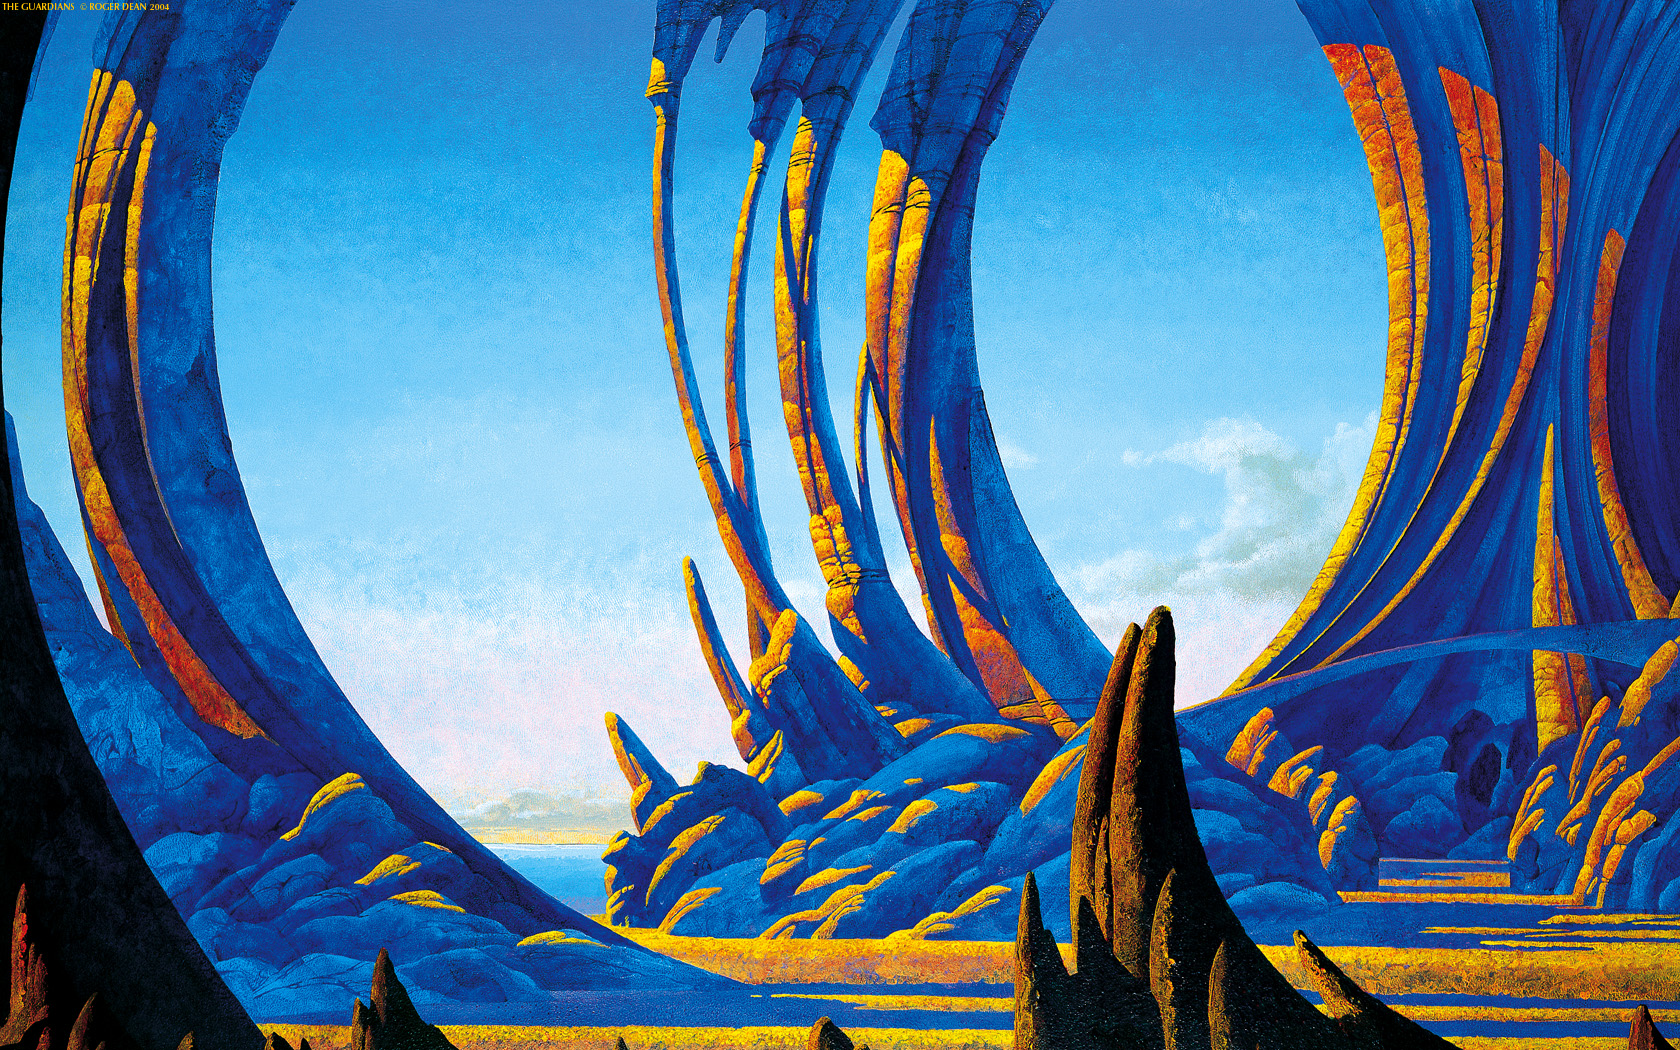 Roger Dean, Yes, Band Wallpaper